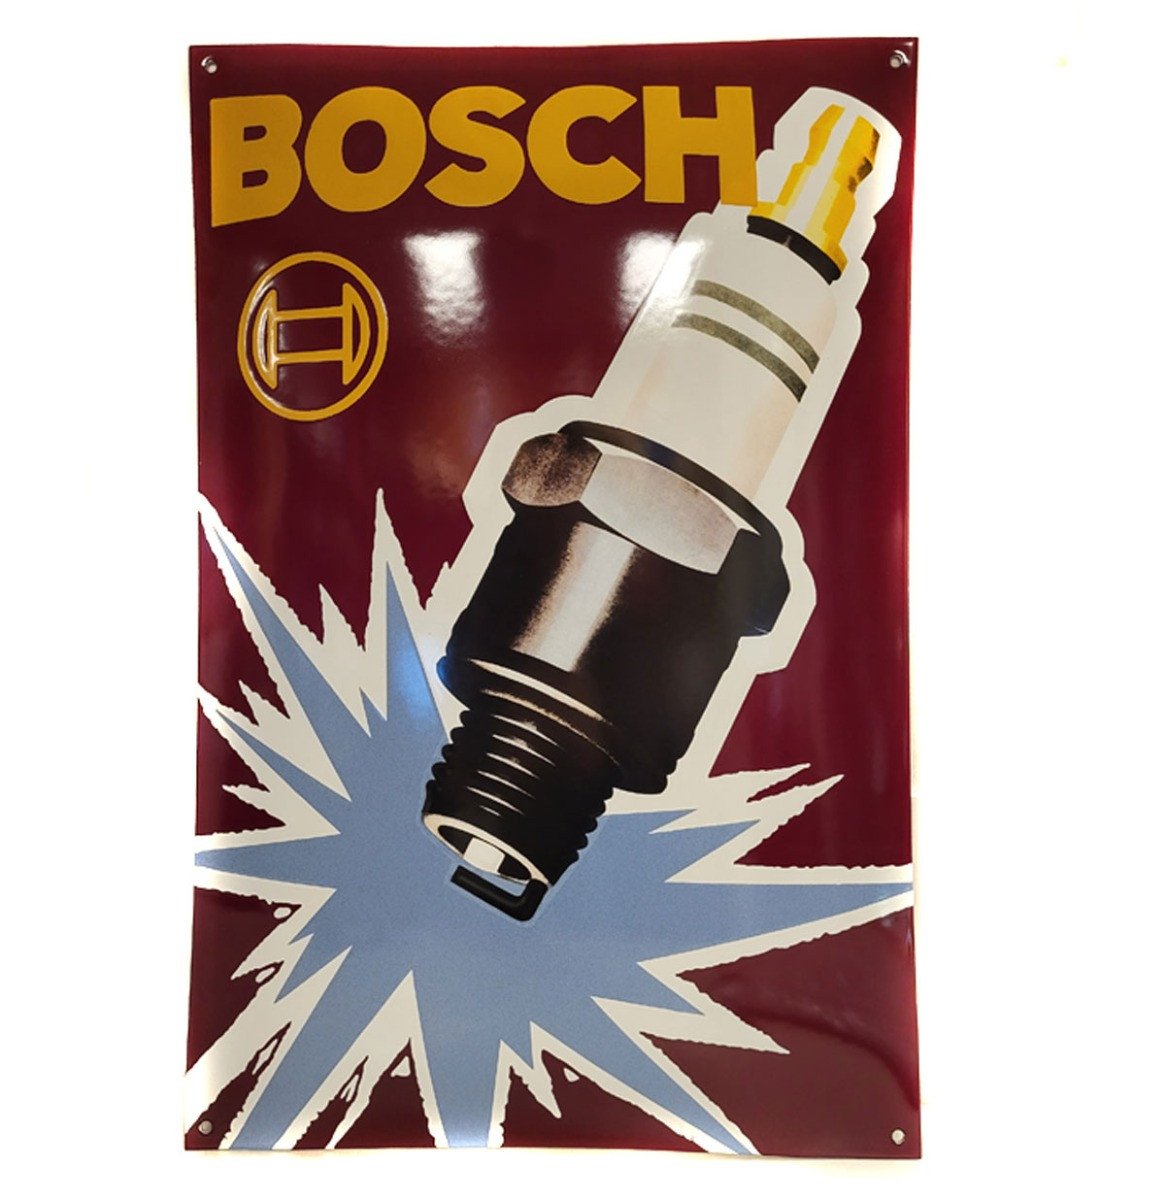 Bosch Bougie Emaille Bord - 60 x 40 cm